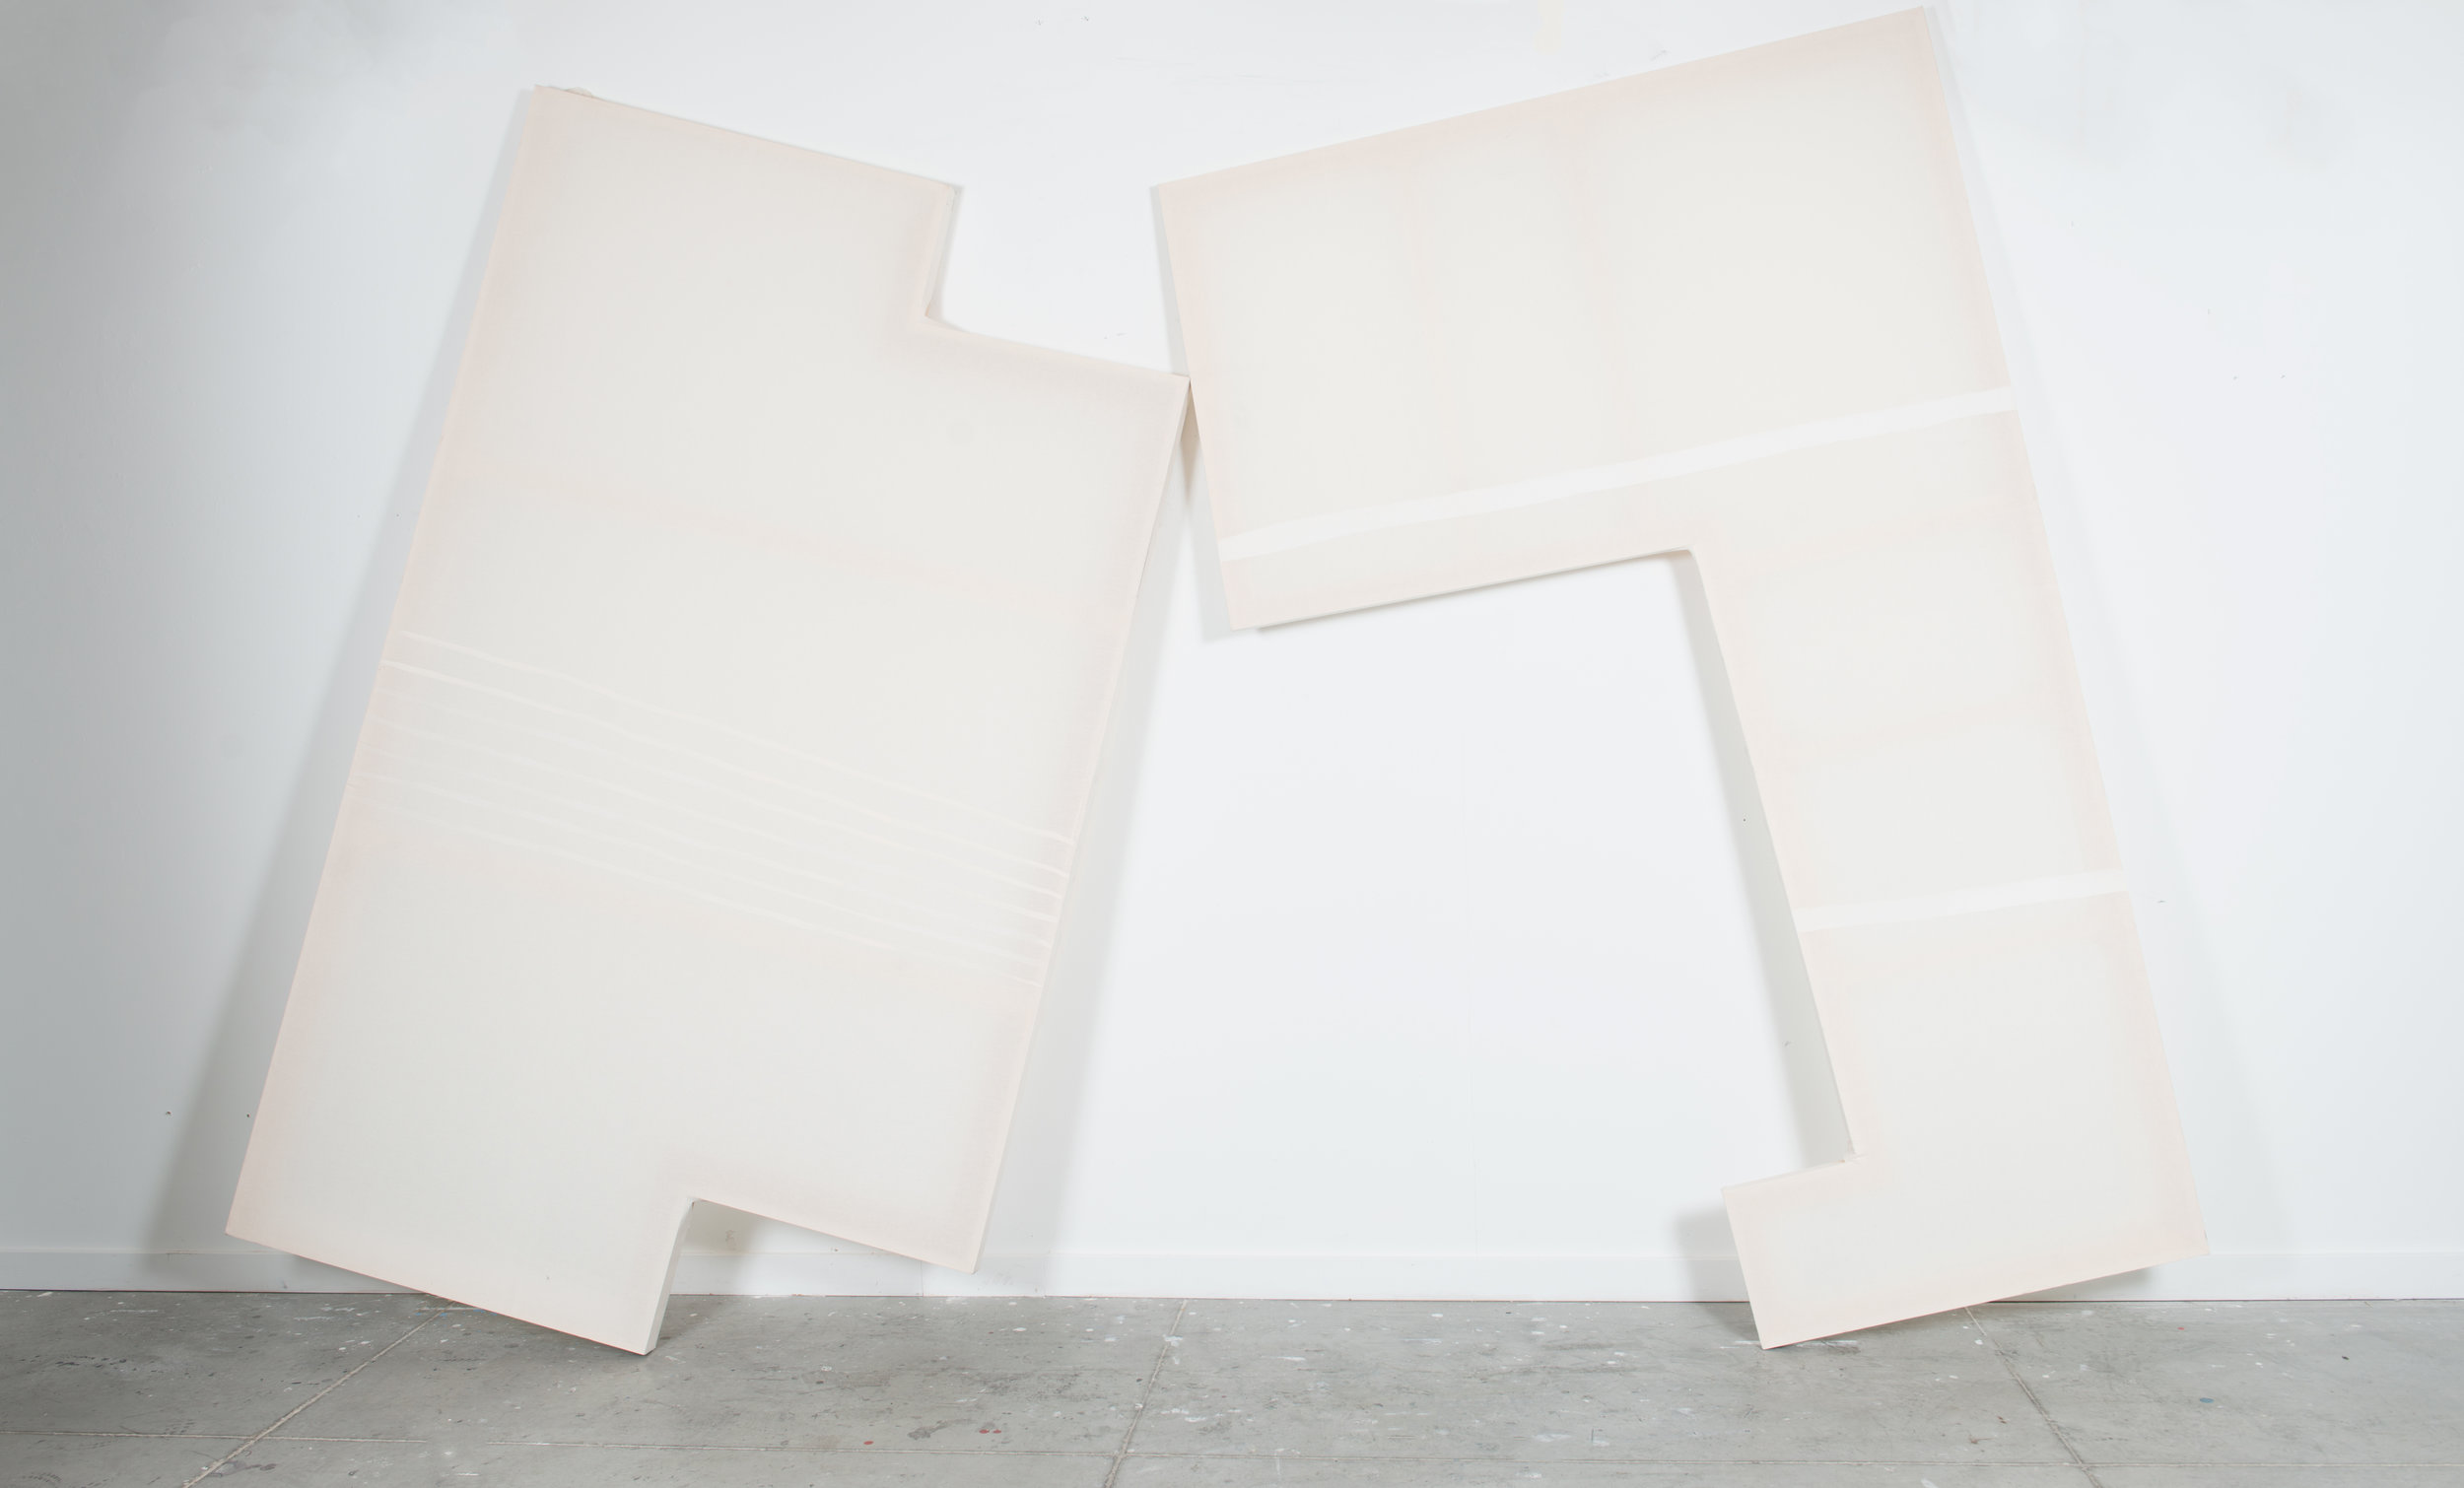   Eyes that Recognize the Right Side, the Wrong Side, and the Other Side    (View 1), 2016, gesso, muslin,&nbsp;wood, 96" X 96” X 2.5"(approx. dimensions/variable) 